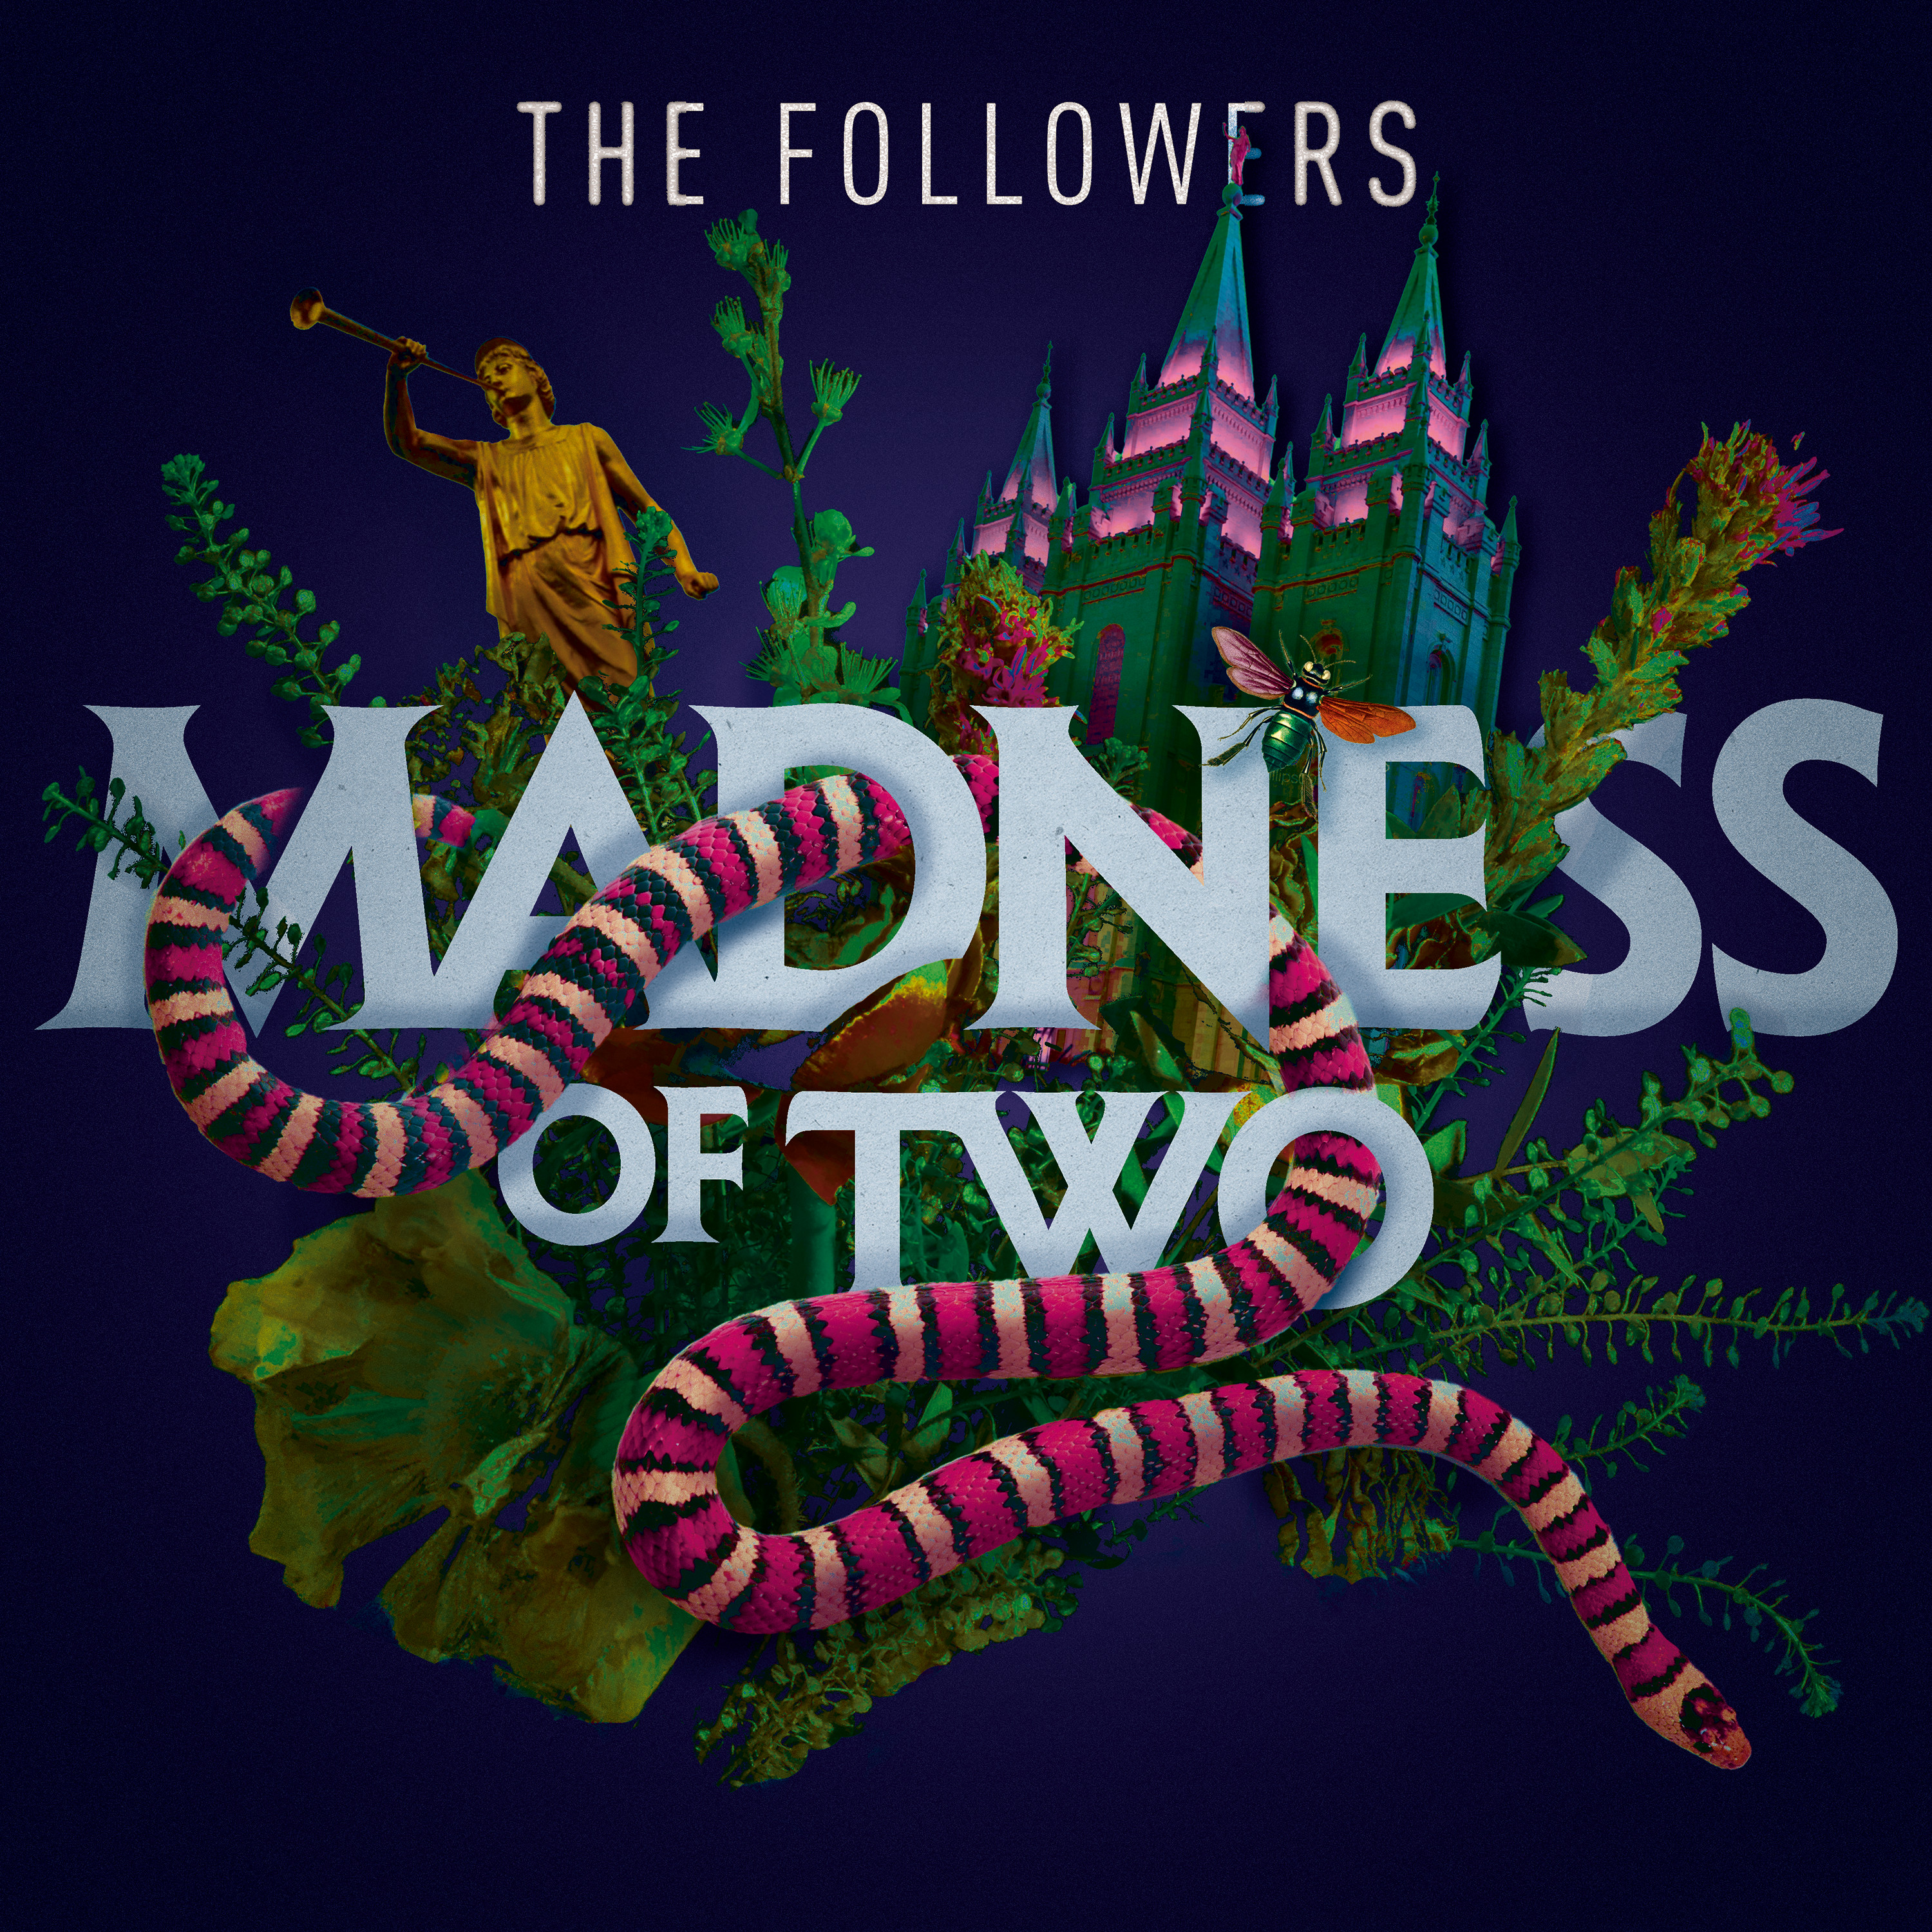 3 - He ain’t heavy - The Followers: Madness of Two - Podcast.